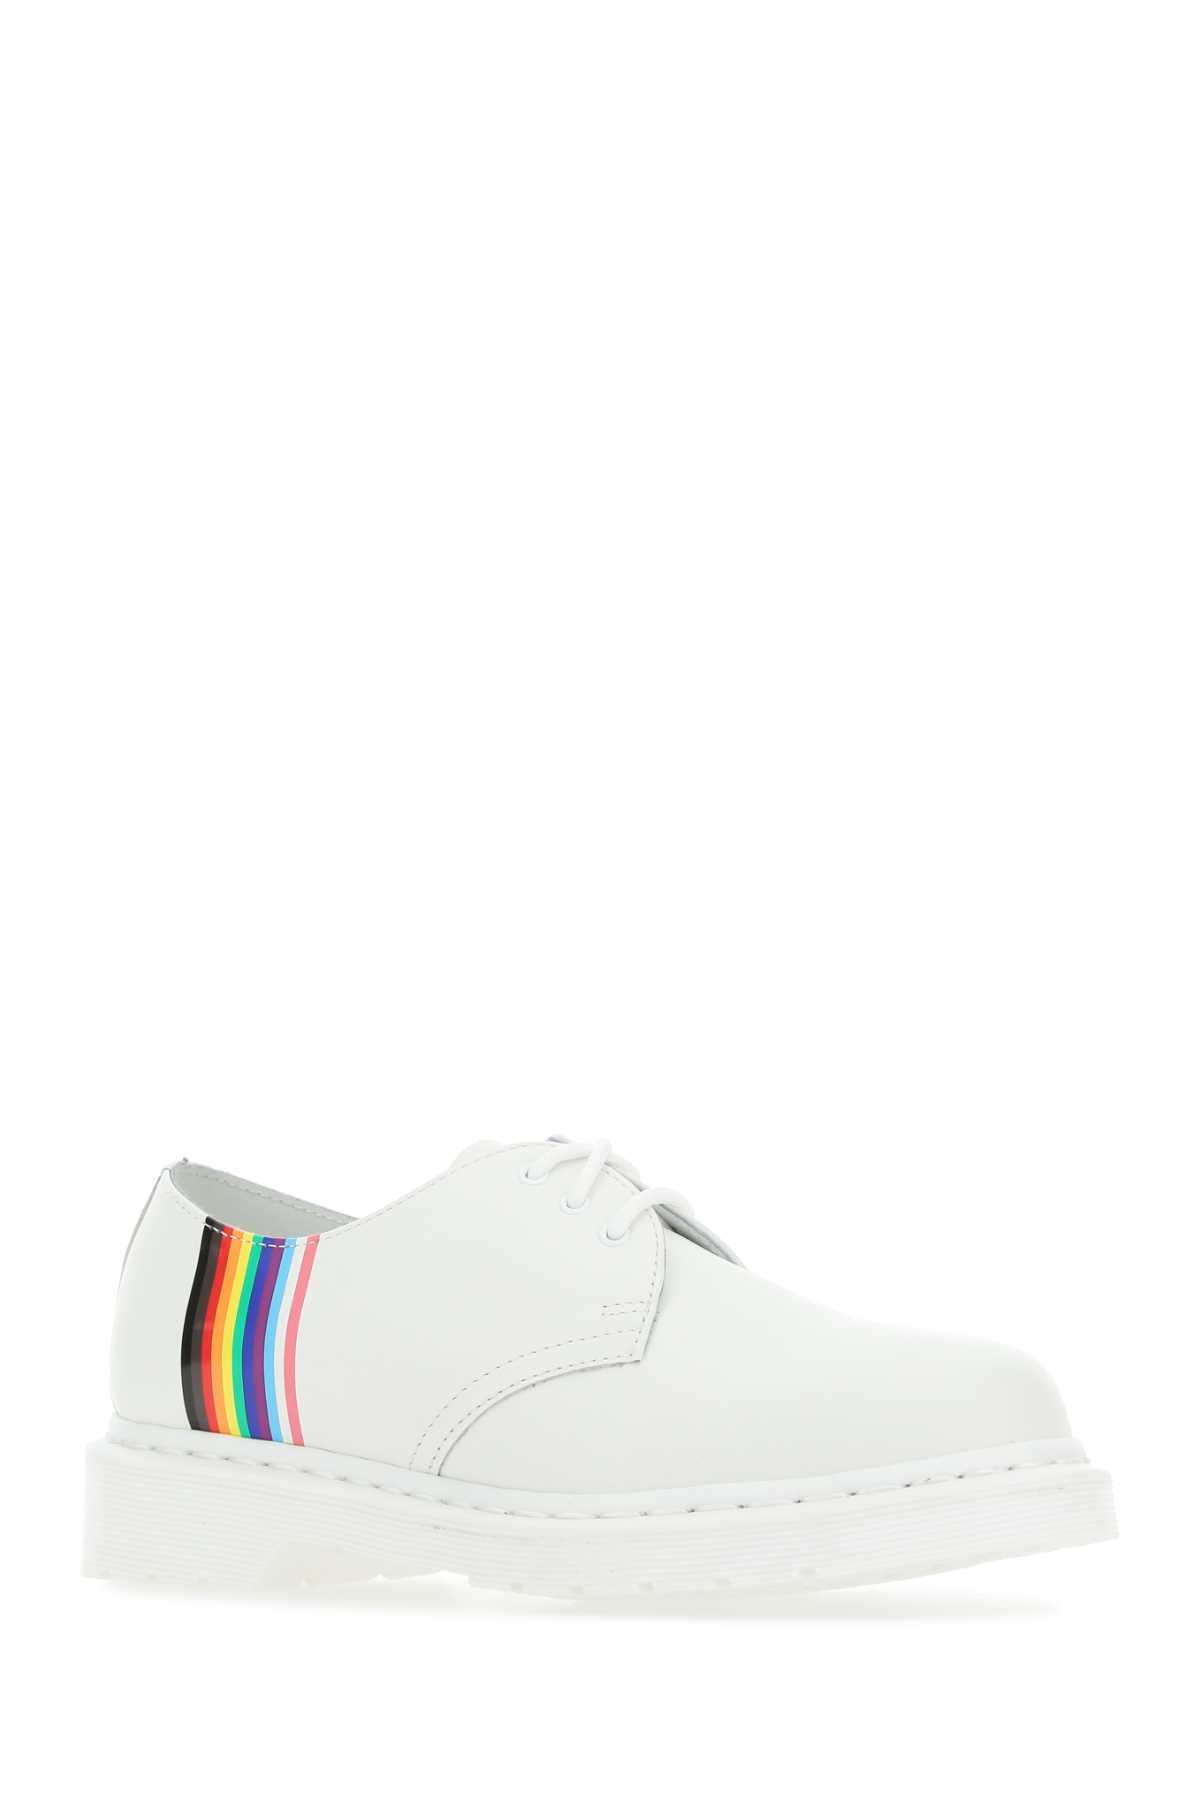 Shop Dr. Martens' White Leather 1461 For Pride Lace-up Shoes